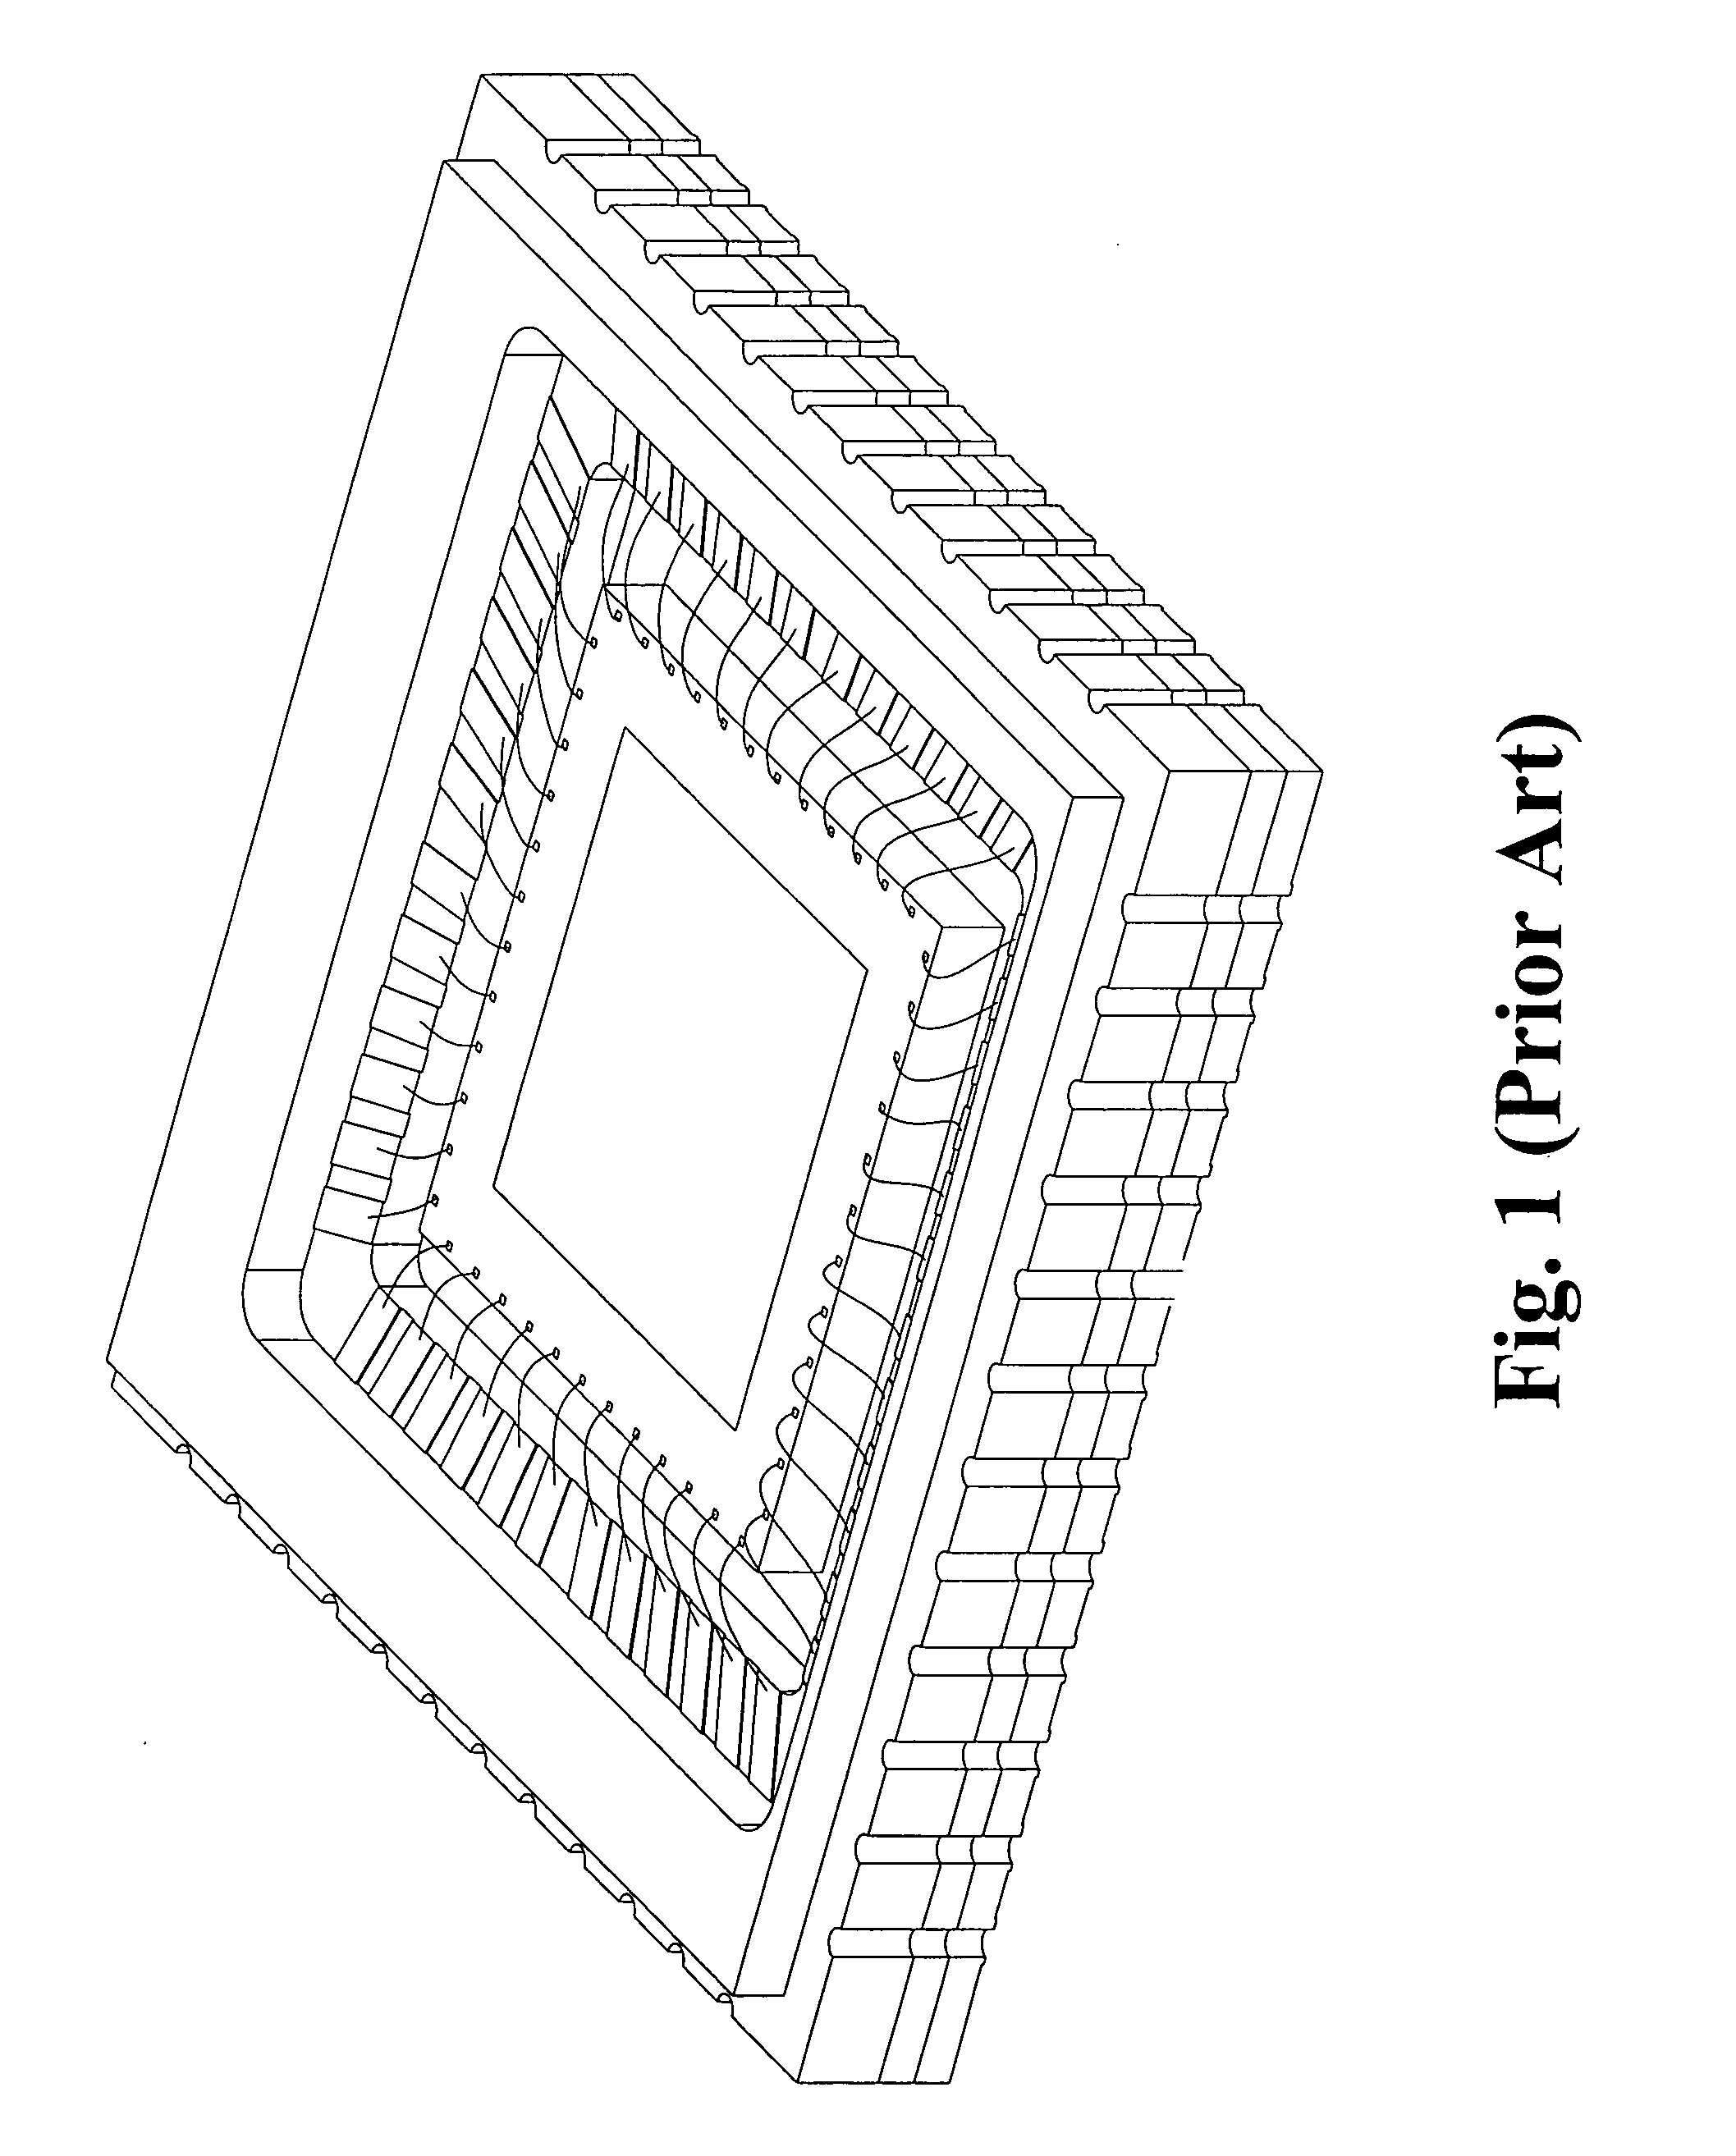 Image sensing module and process for packaging the same